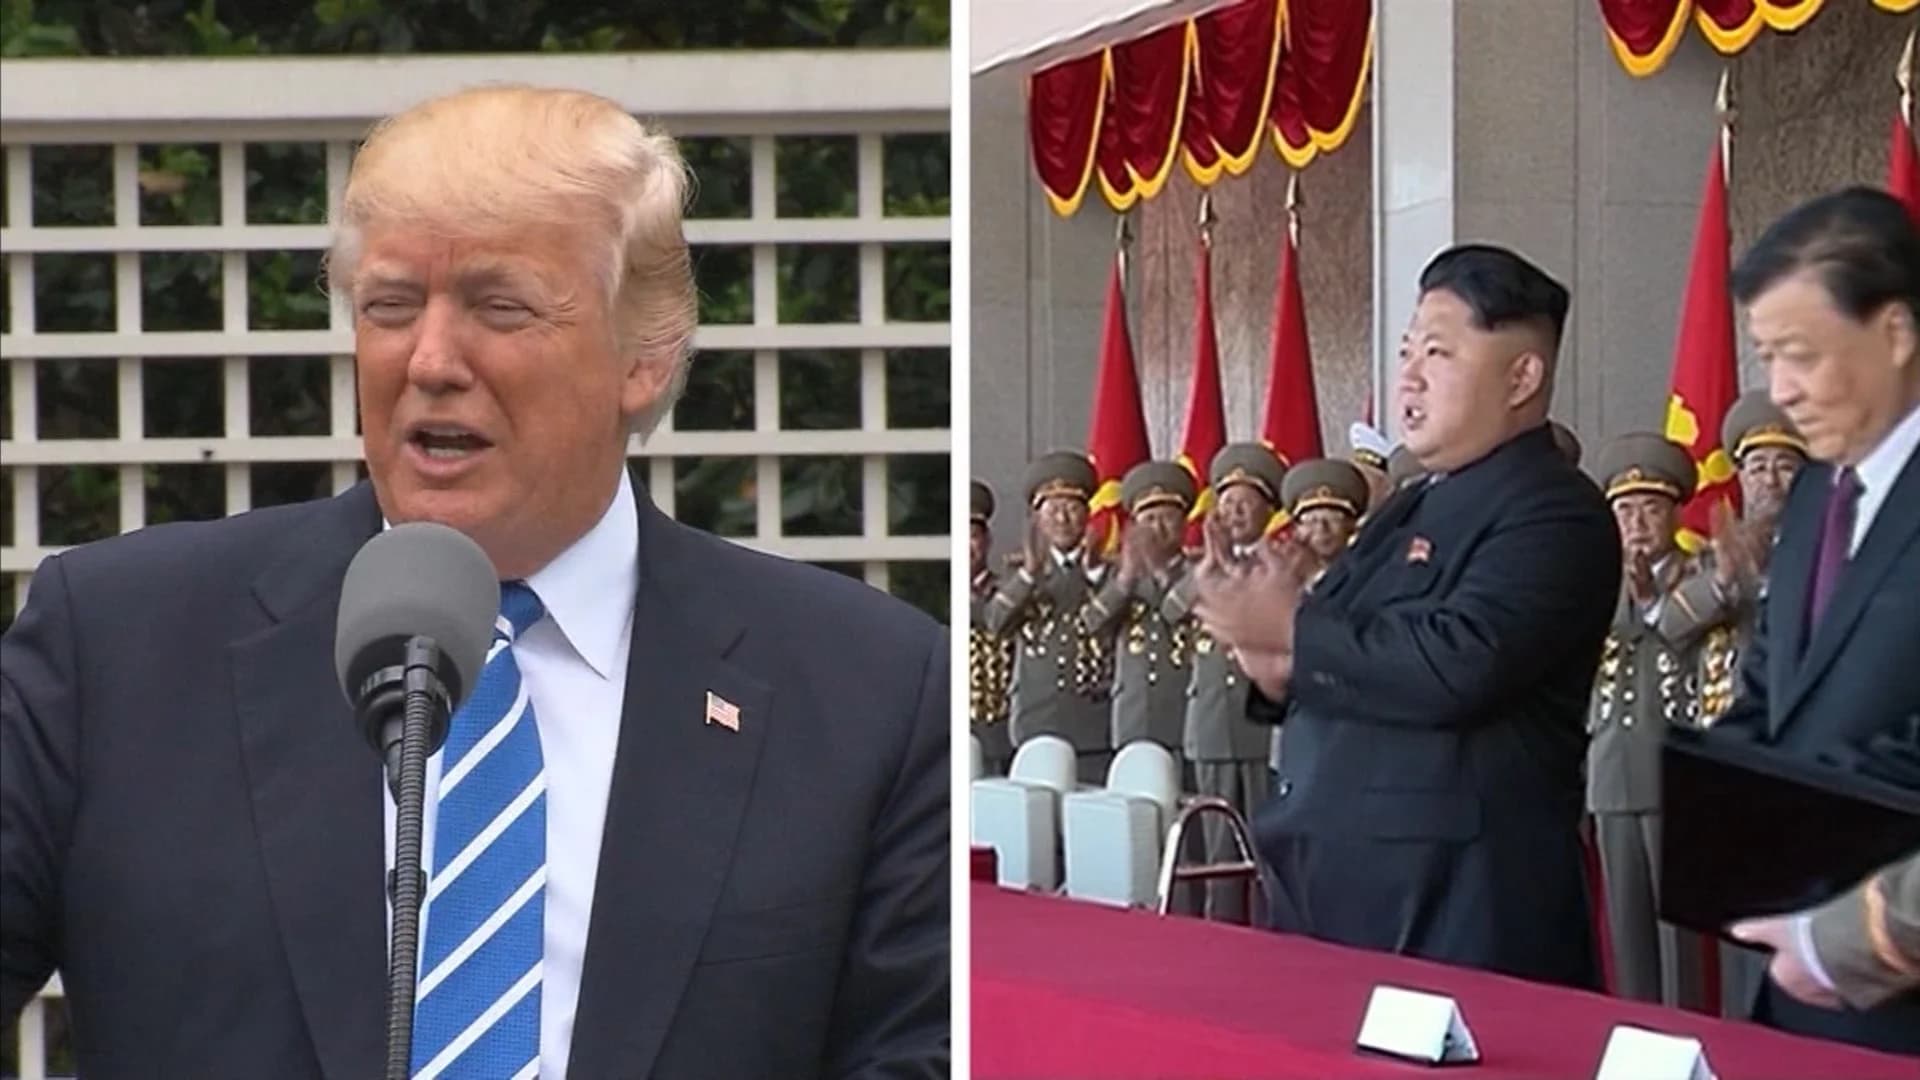 President Trump cancels summit, citing 'open hostility' by North Korea